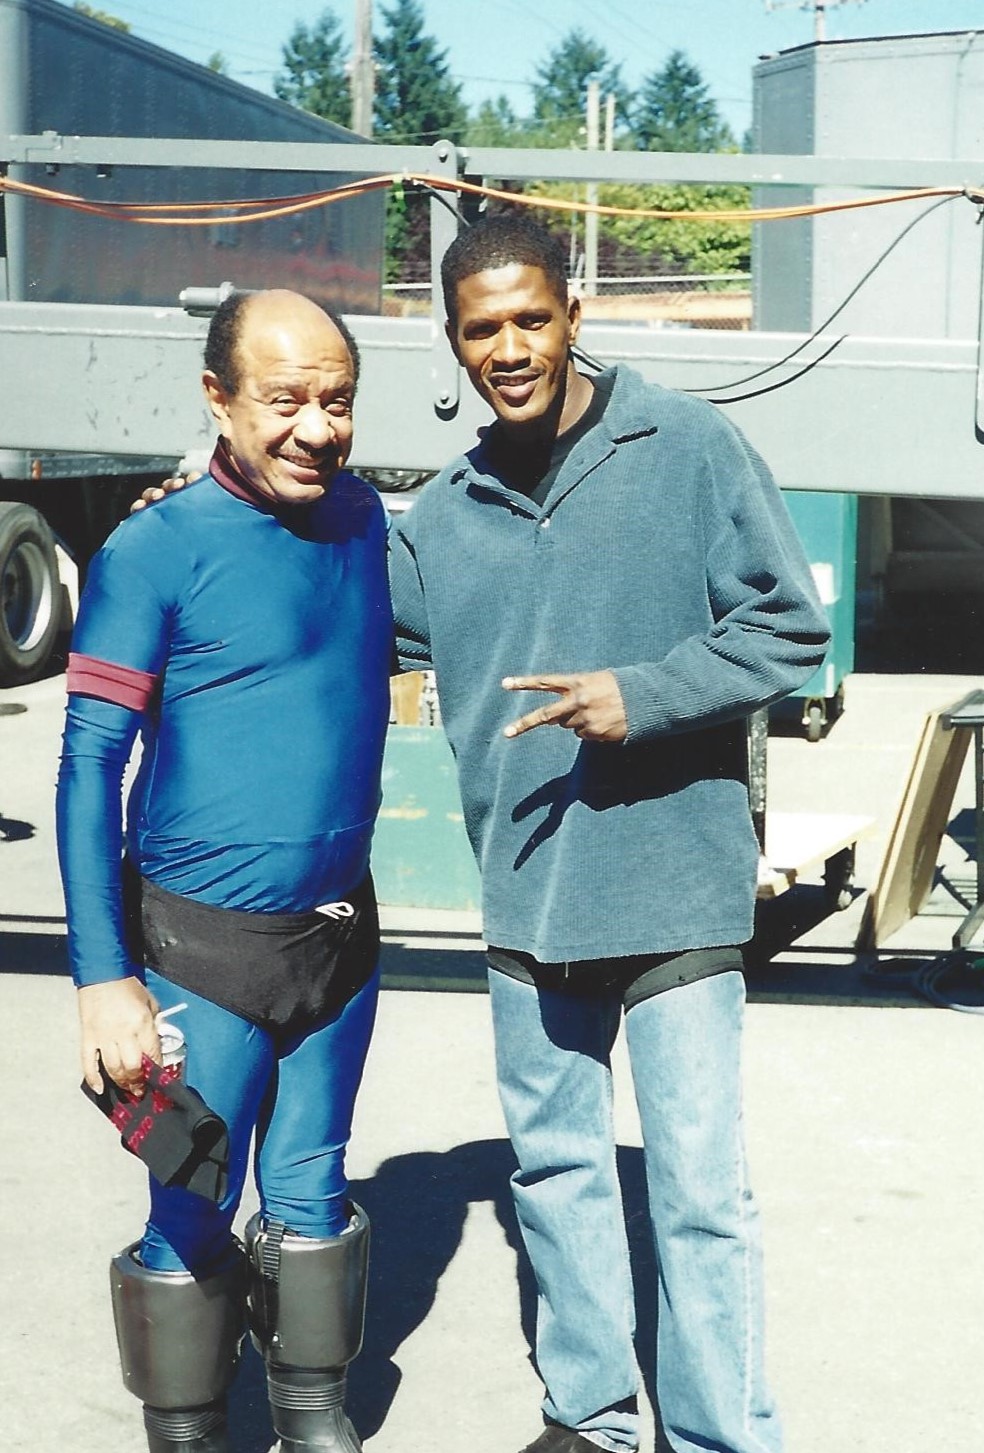 Sherman Hemsley. Lots of laughs! Rest in Peace my brother!